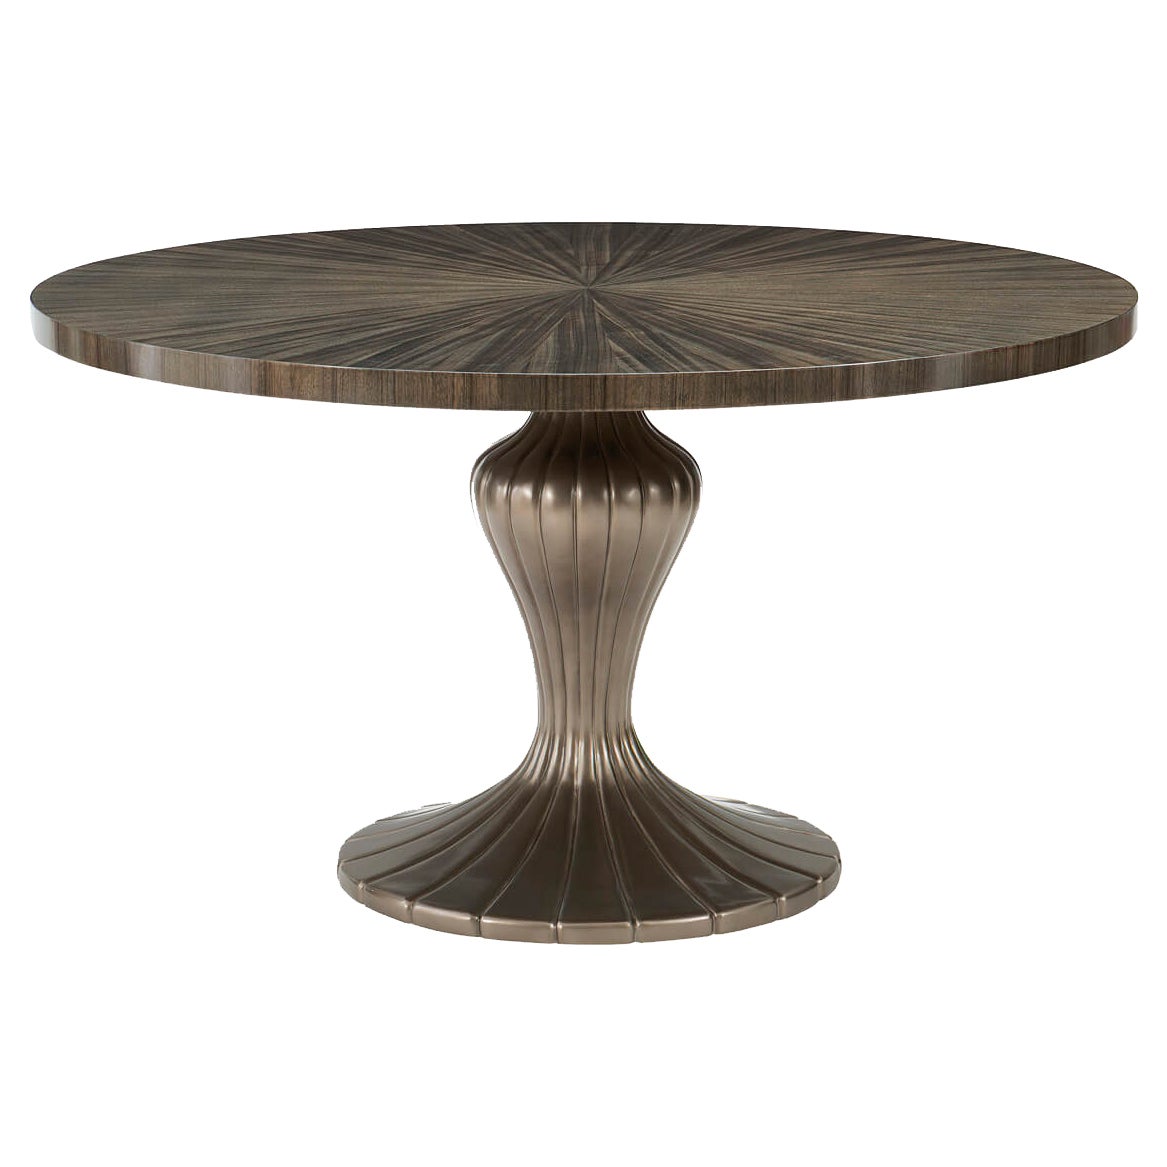 Art Deco Inspired Style Round Dining Table